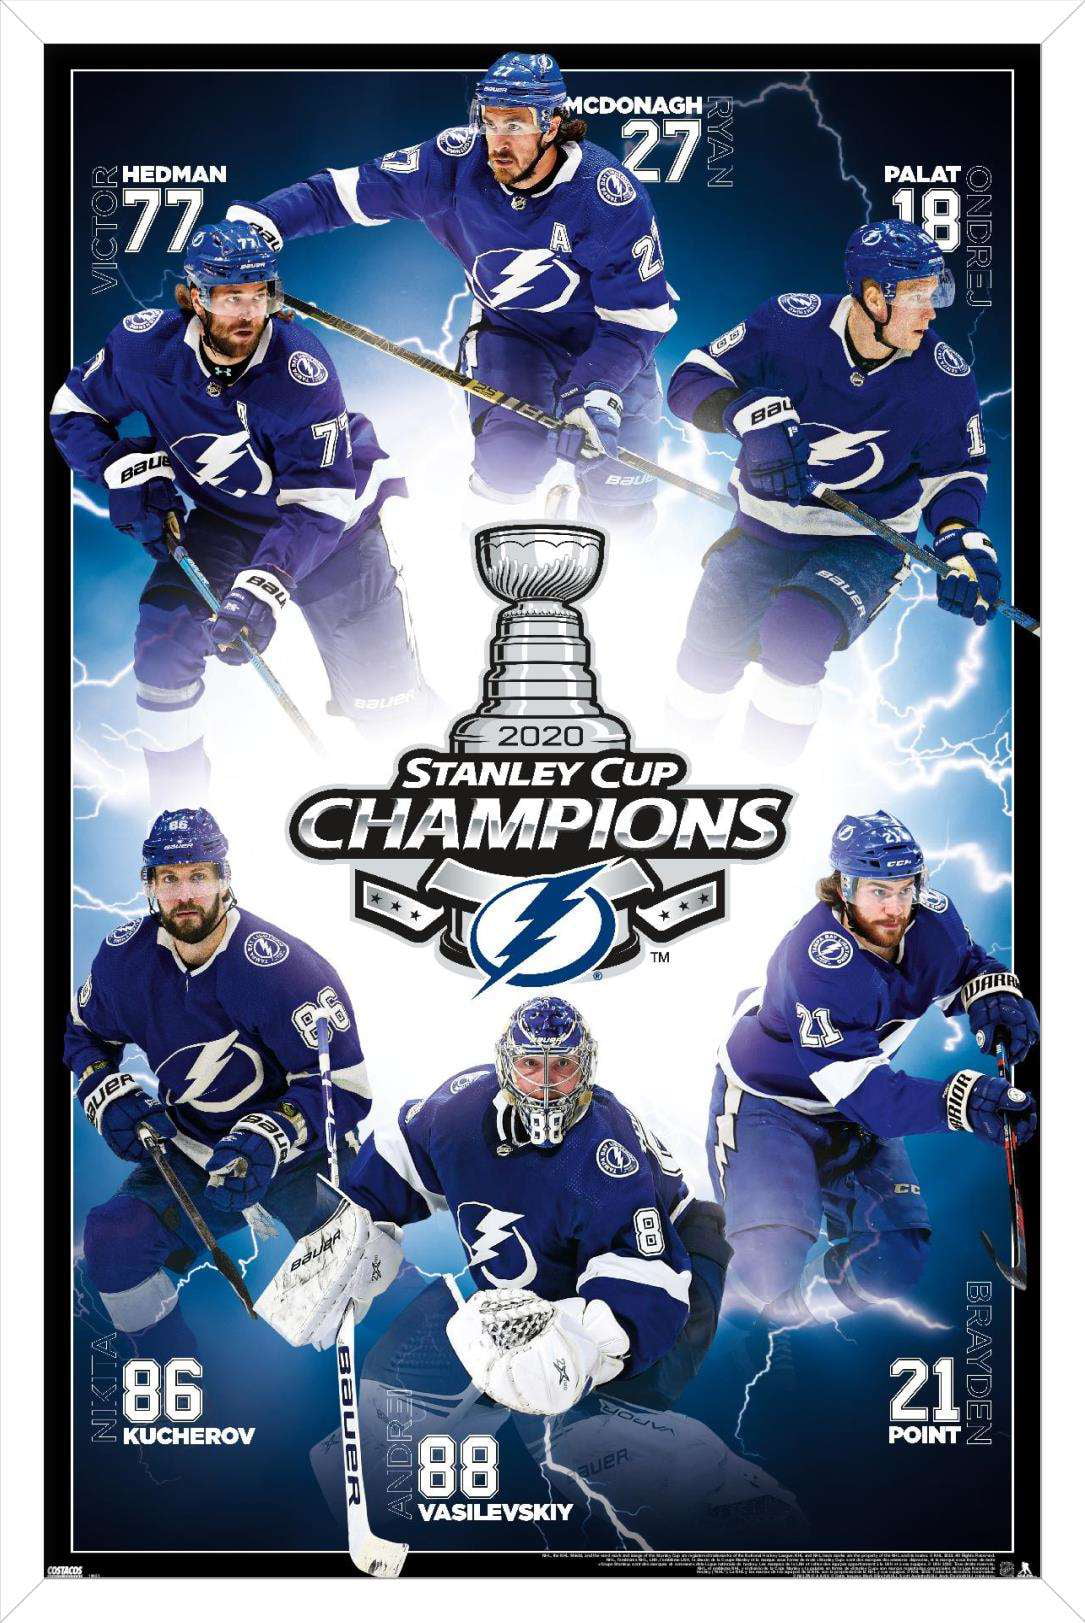 Tampa Bay Lightning Large Decal Sticker, 2020 NHL Stanley Cup